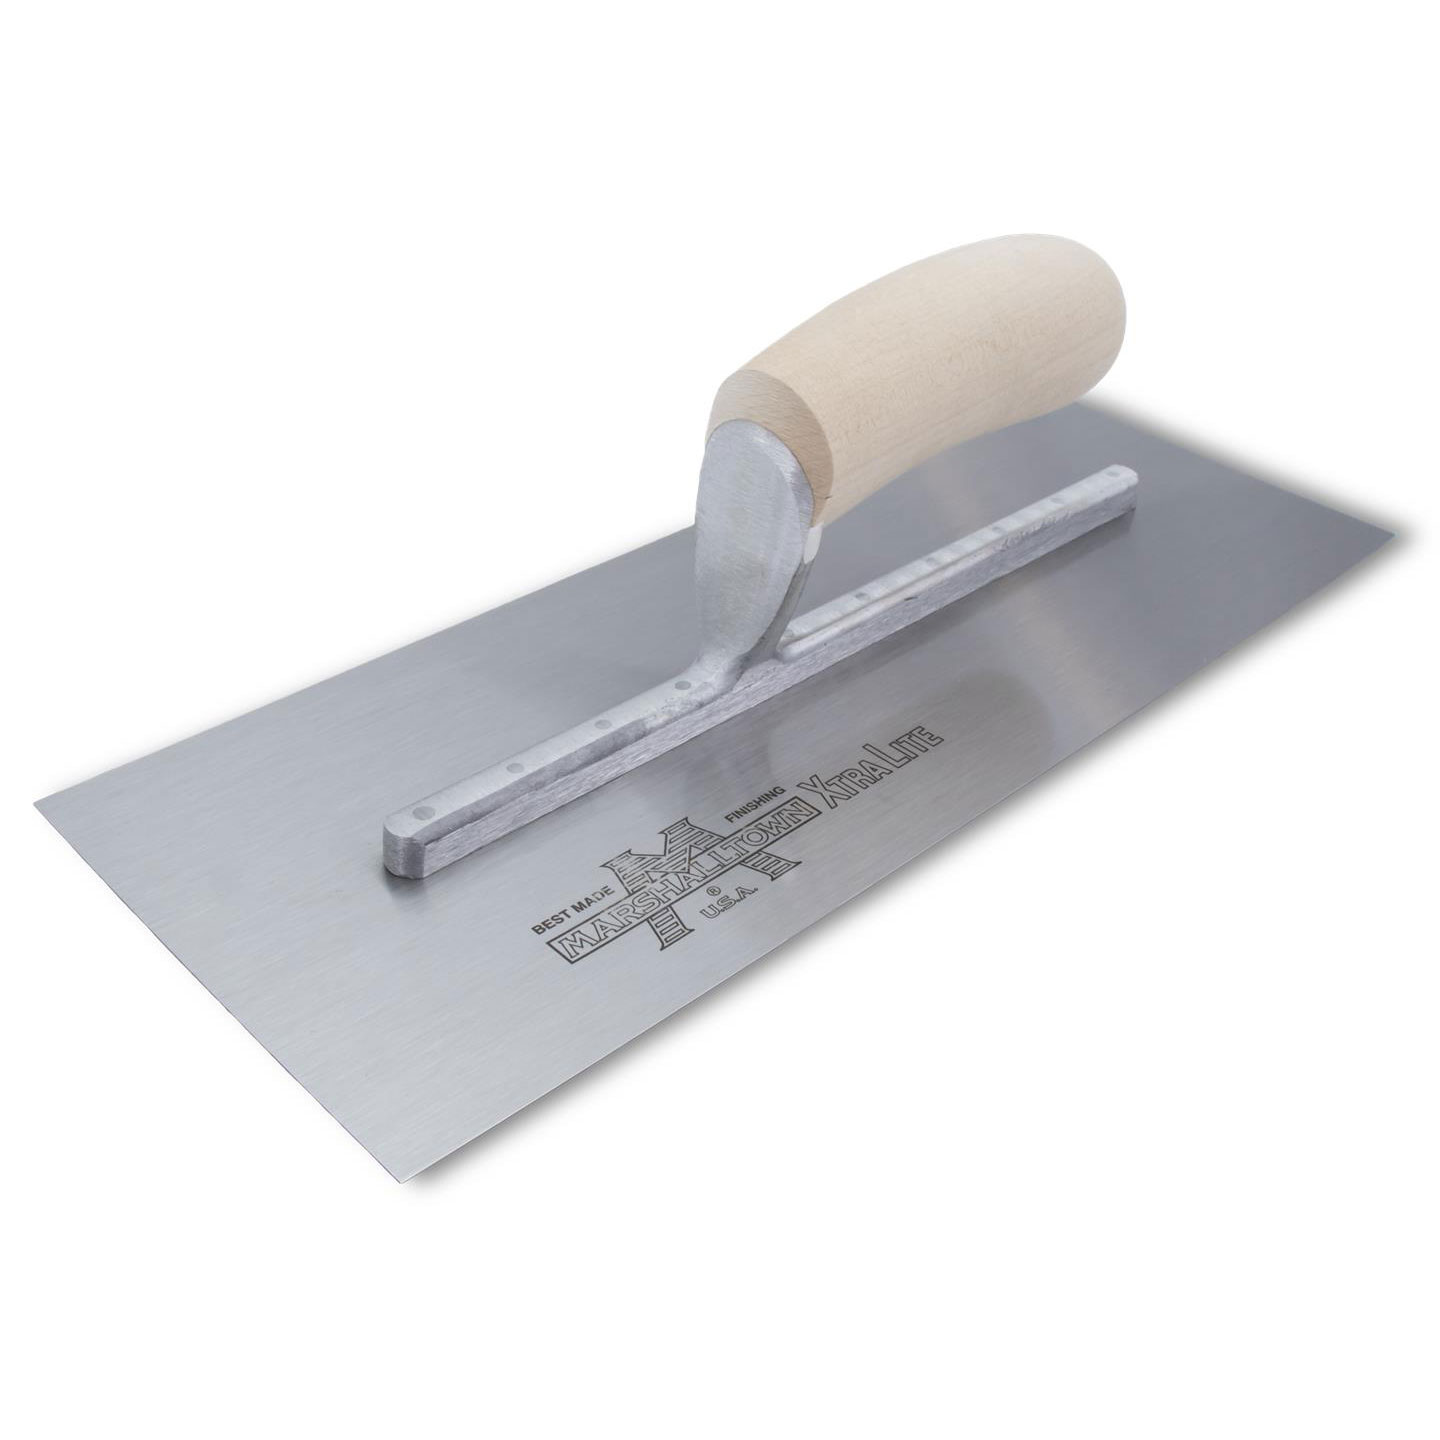 Marshalltown MX58 14in x 3-1/2in Finishing Trowel with Straight Wood Handle MX58